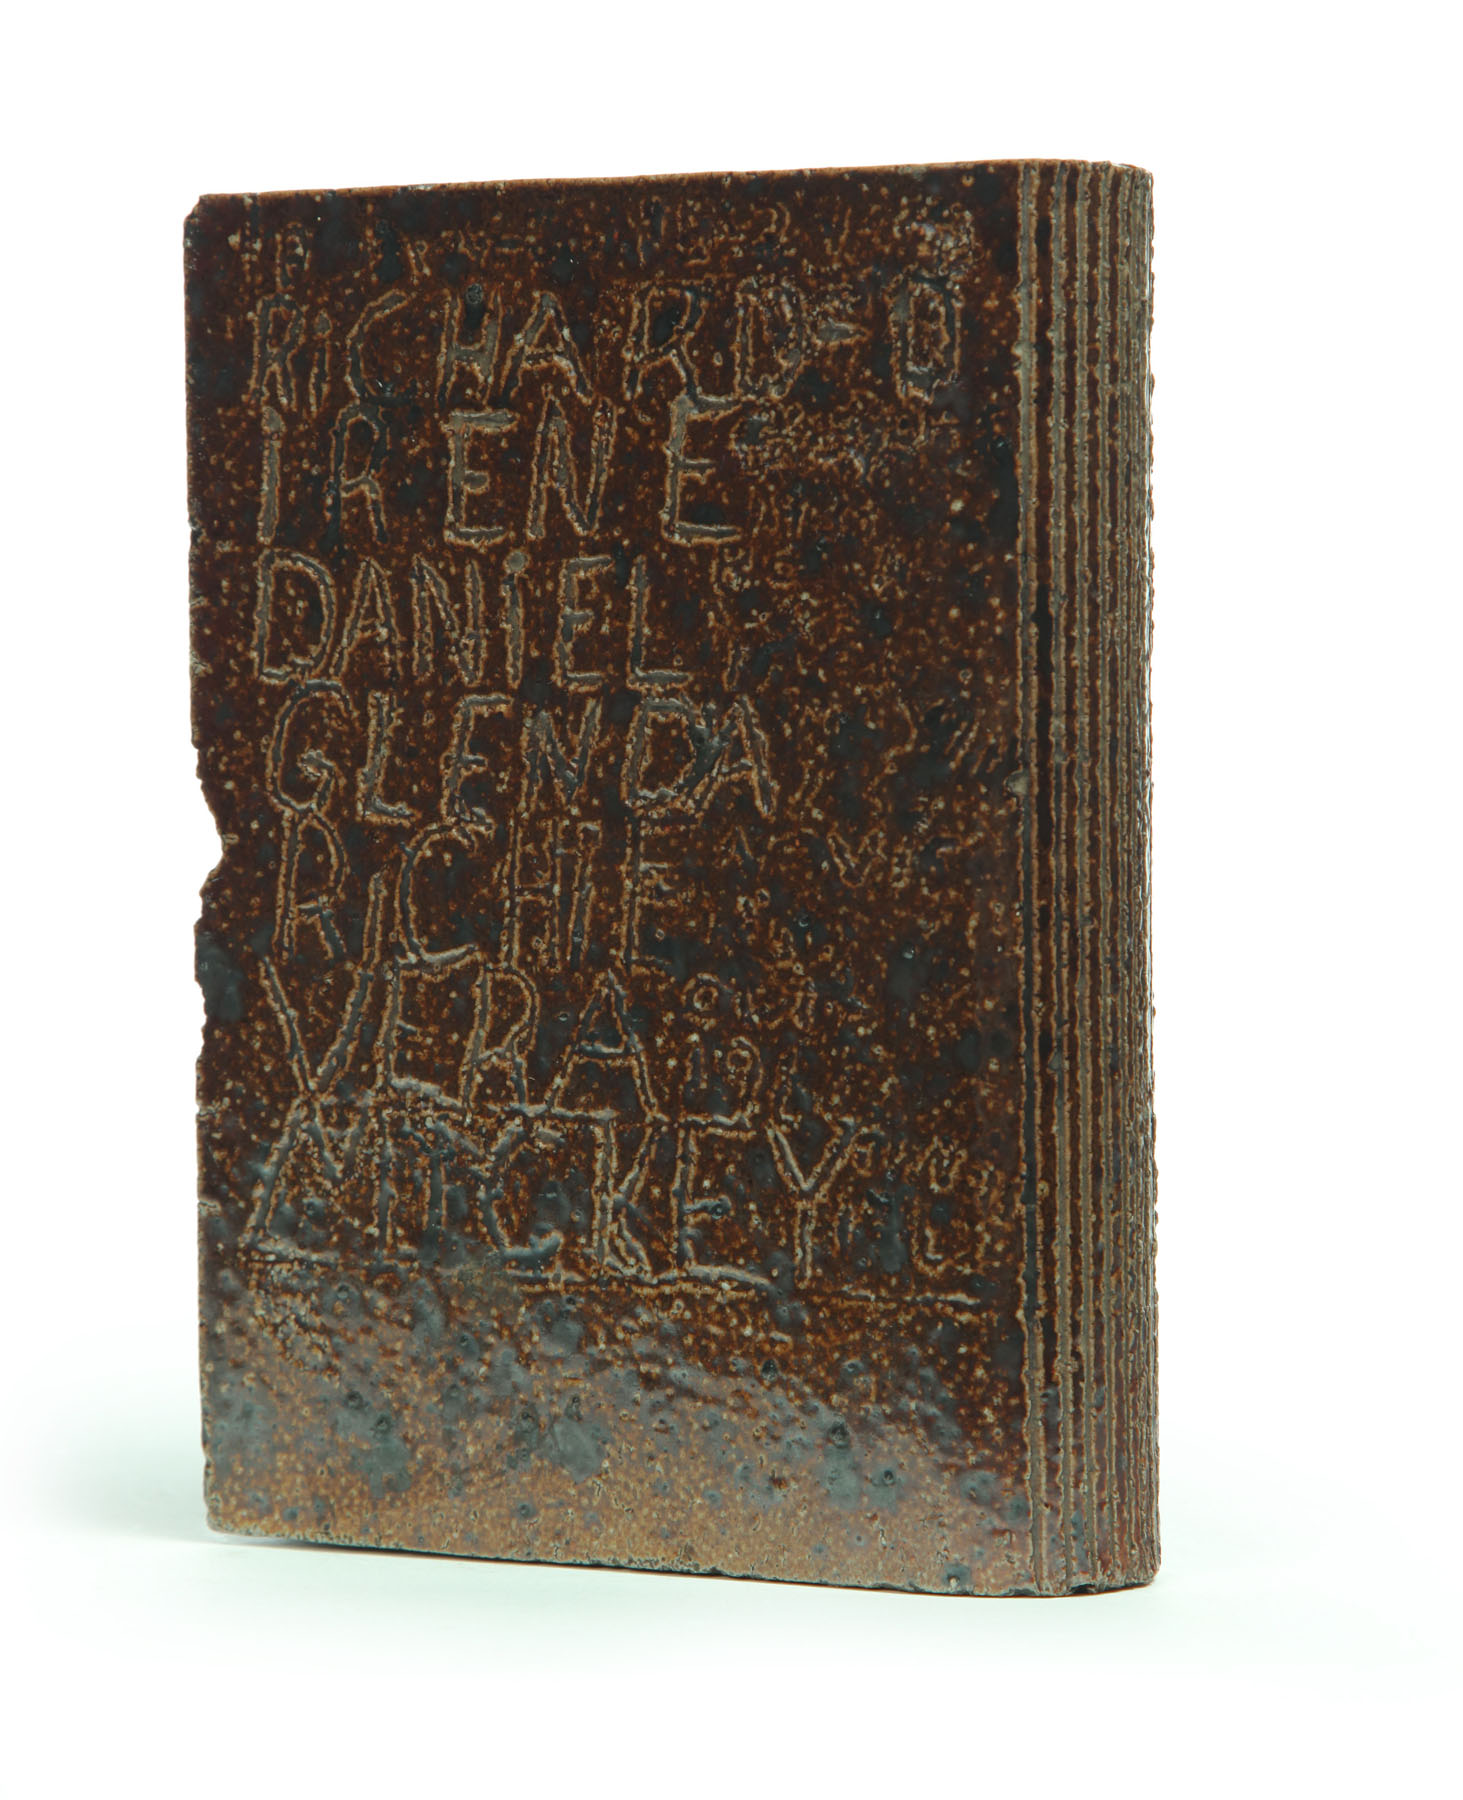 SEWERTILE BOOK.  Probably Ohio